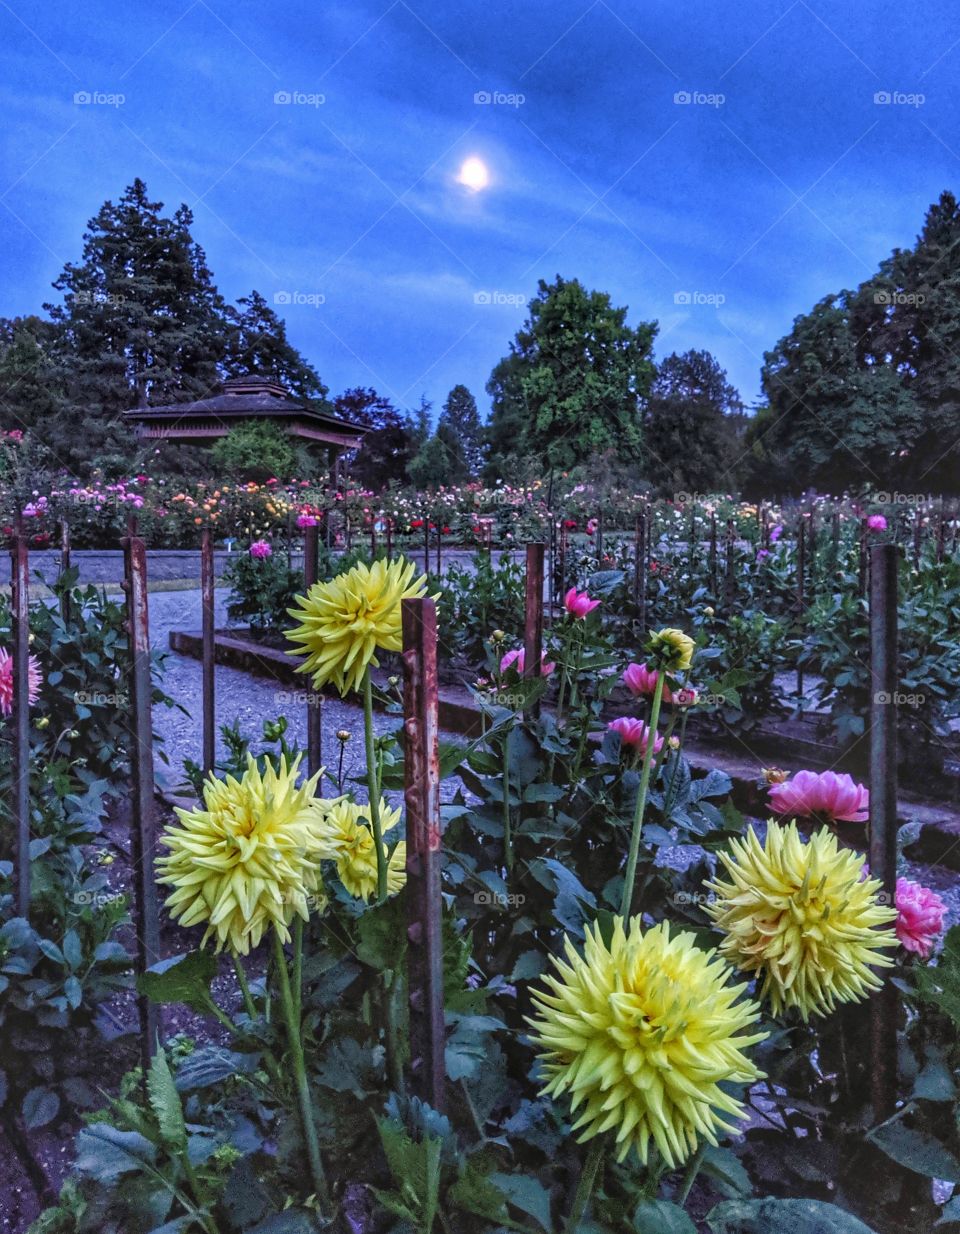 beautiful & colorful dahlia garden with the full moon in the sky